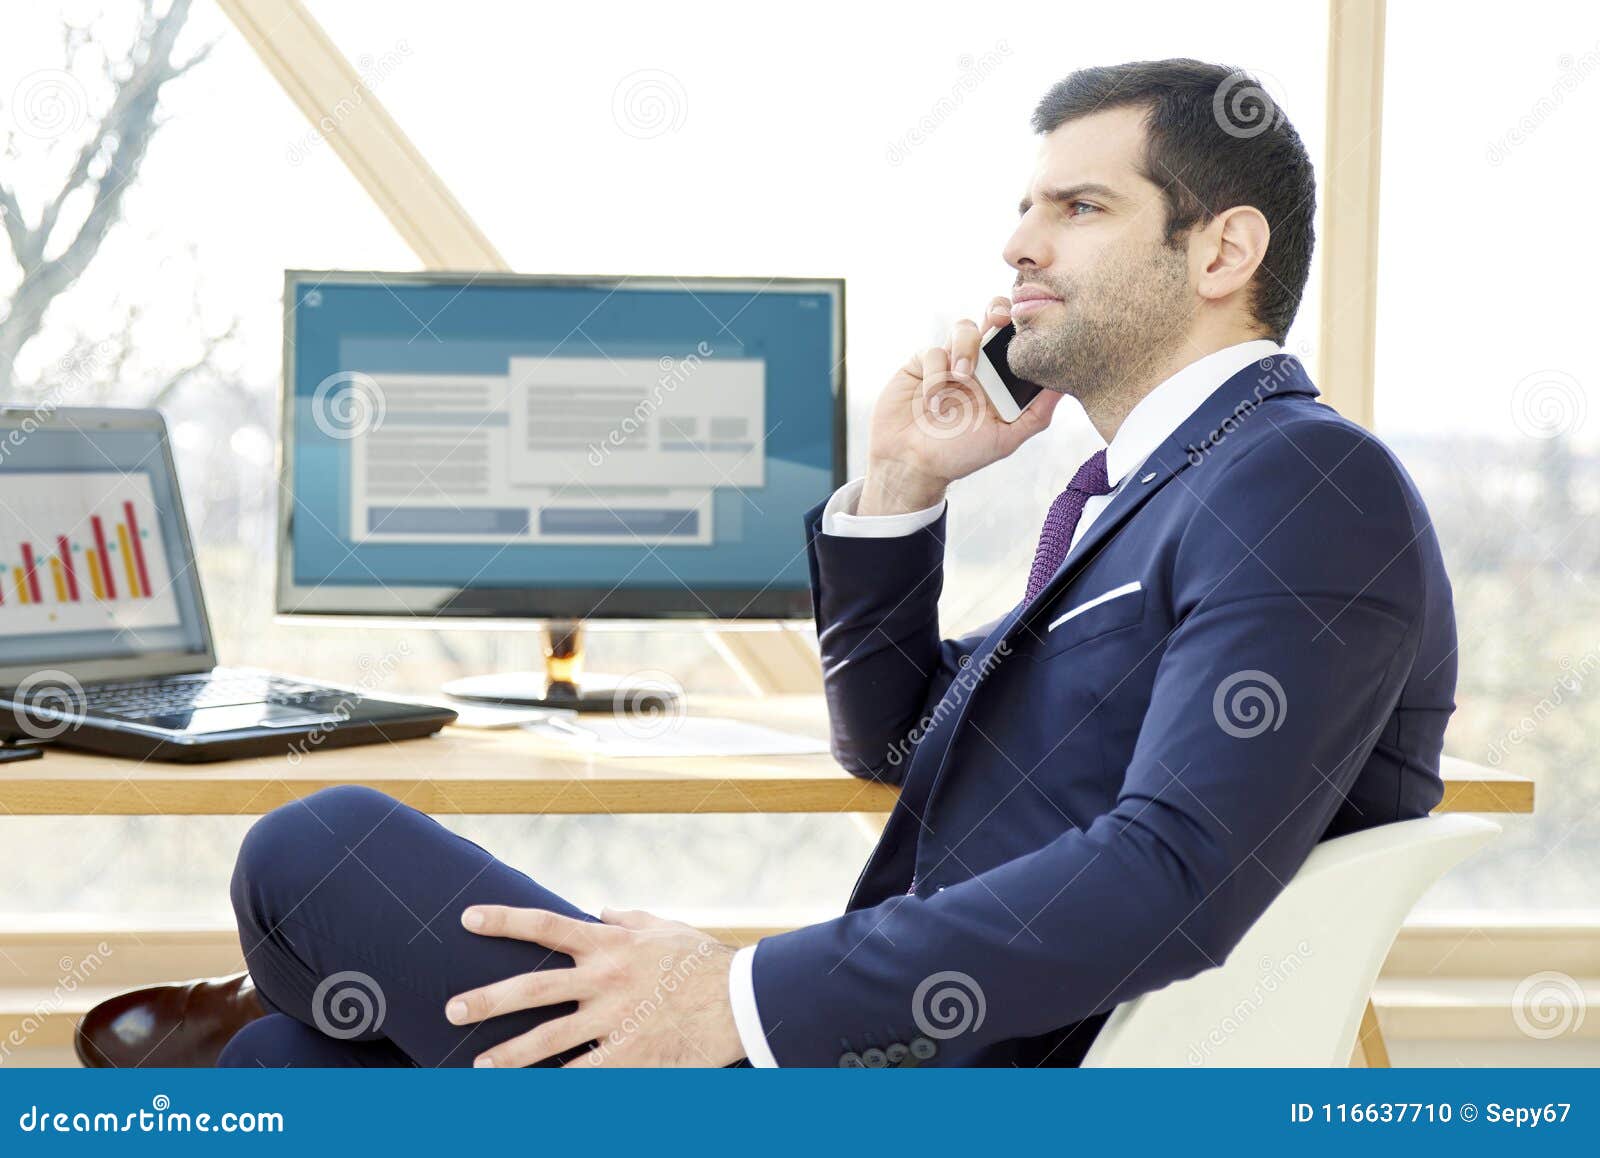 Financial Consultant Businessman Stock Photo - Image of laptop, growing ...